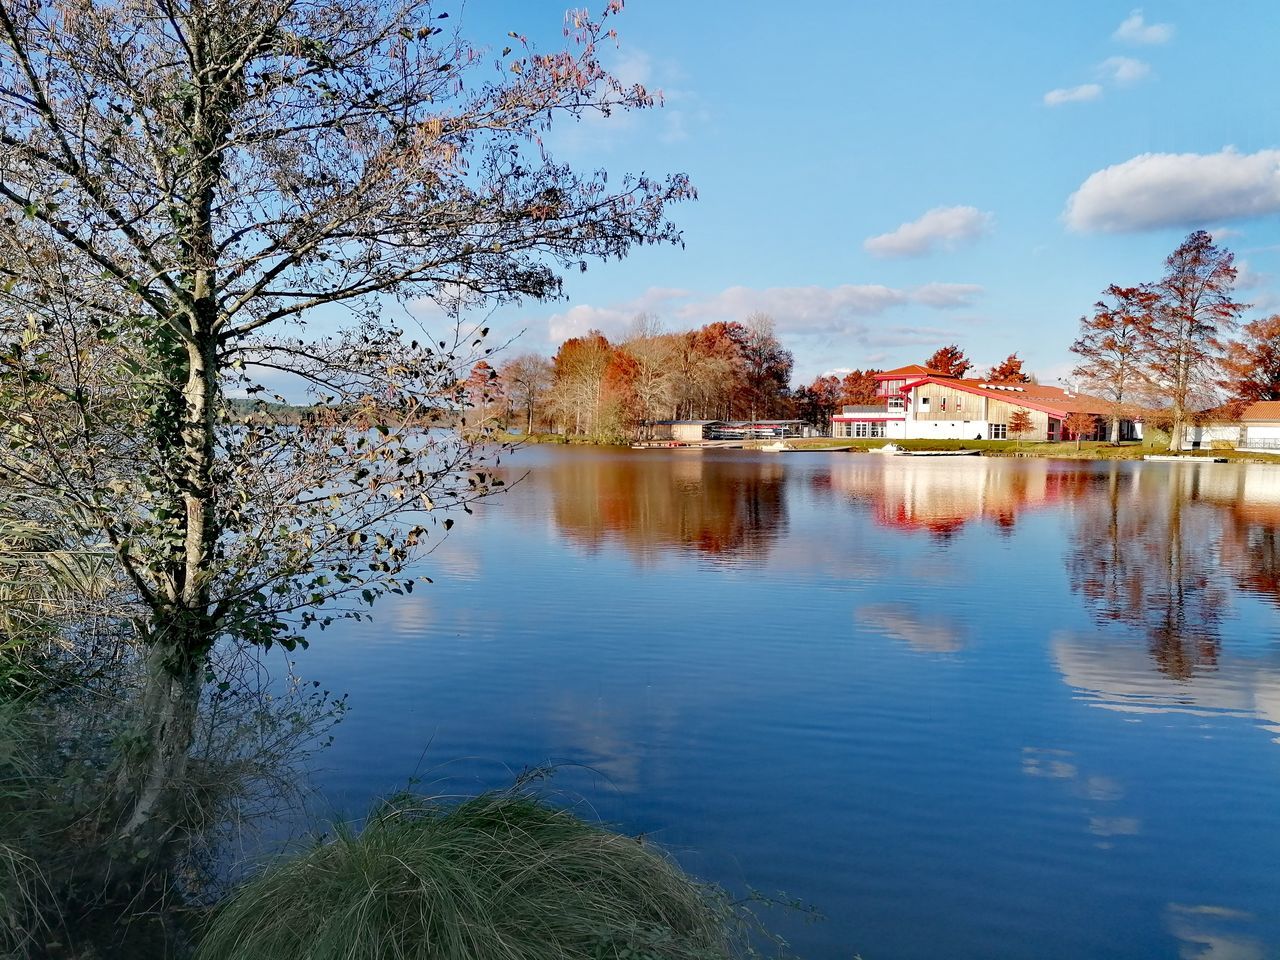 water, tree, reflection, plant, sky, nature, autumn, lake, architecture, beauty in nature, scenics - nature, built structure, tranquility, no people, flower, cloud, building exterior, travel destinations, landscape, blue, tranquil scene, leaf, morning, building, outdoors, day, house, body of water, idyllic, travel, environment, tourism